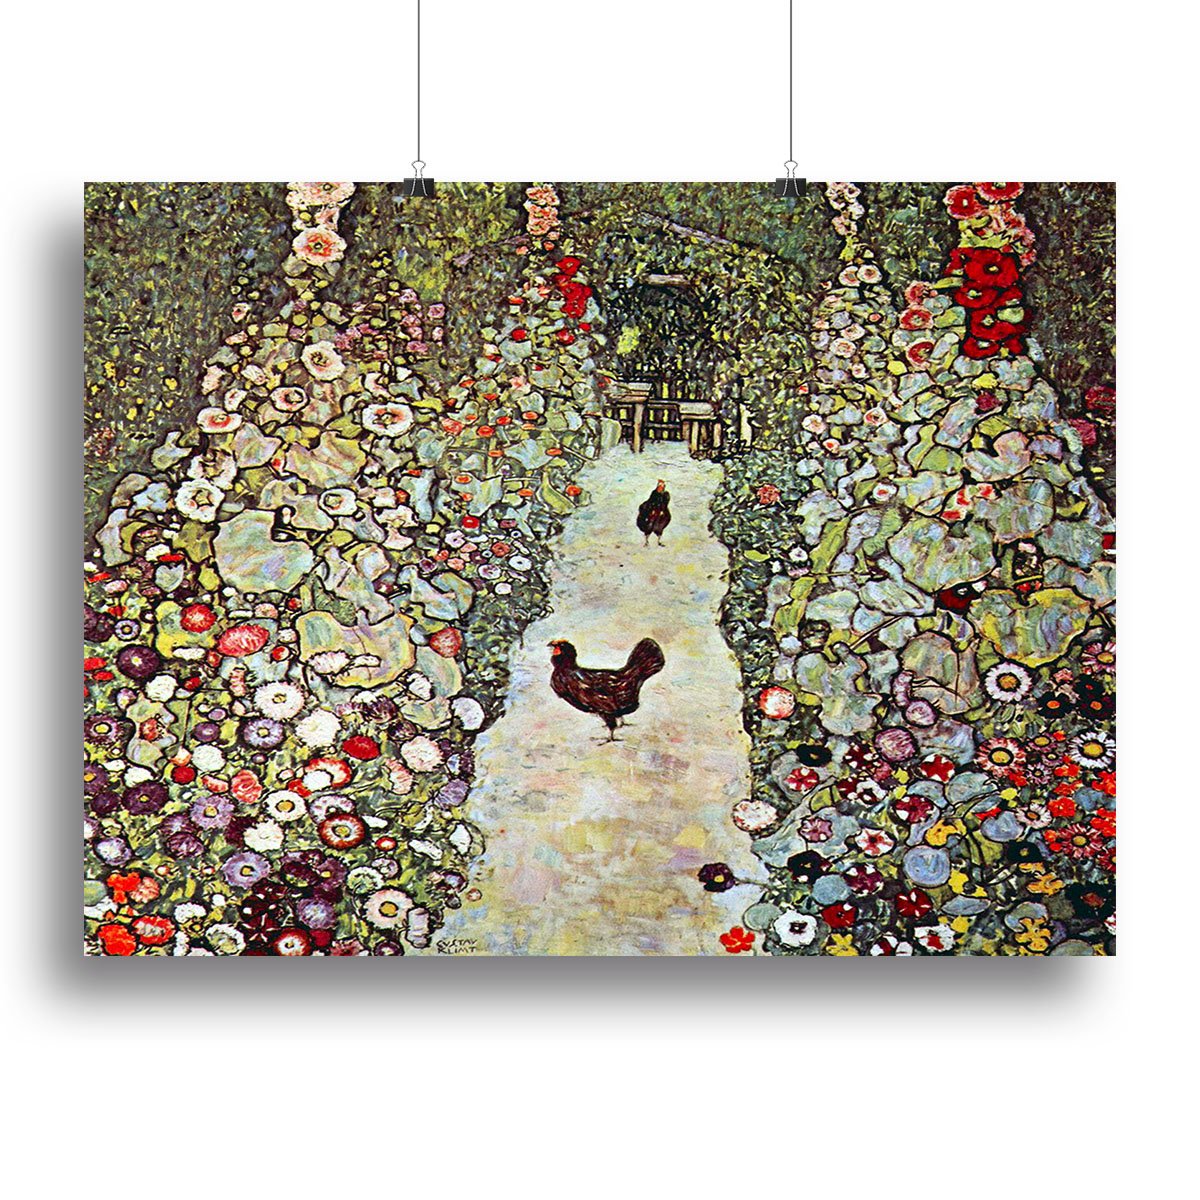 Garden Path with Chickens by Klimt Canvas Print or Poster